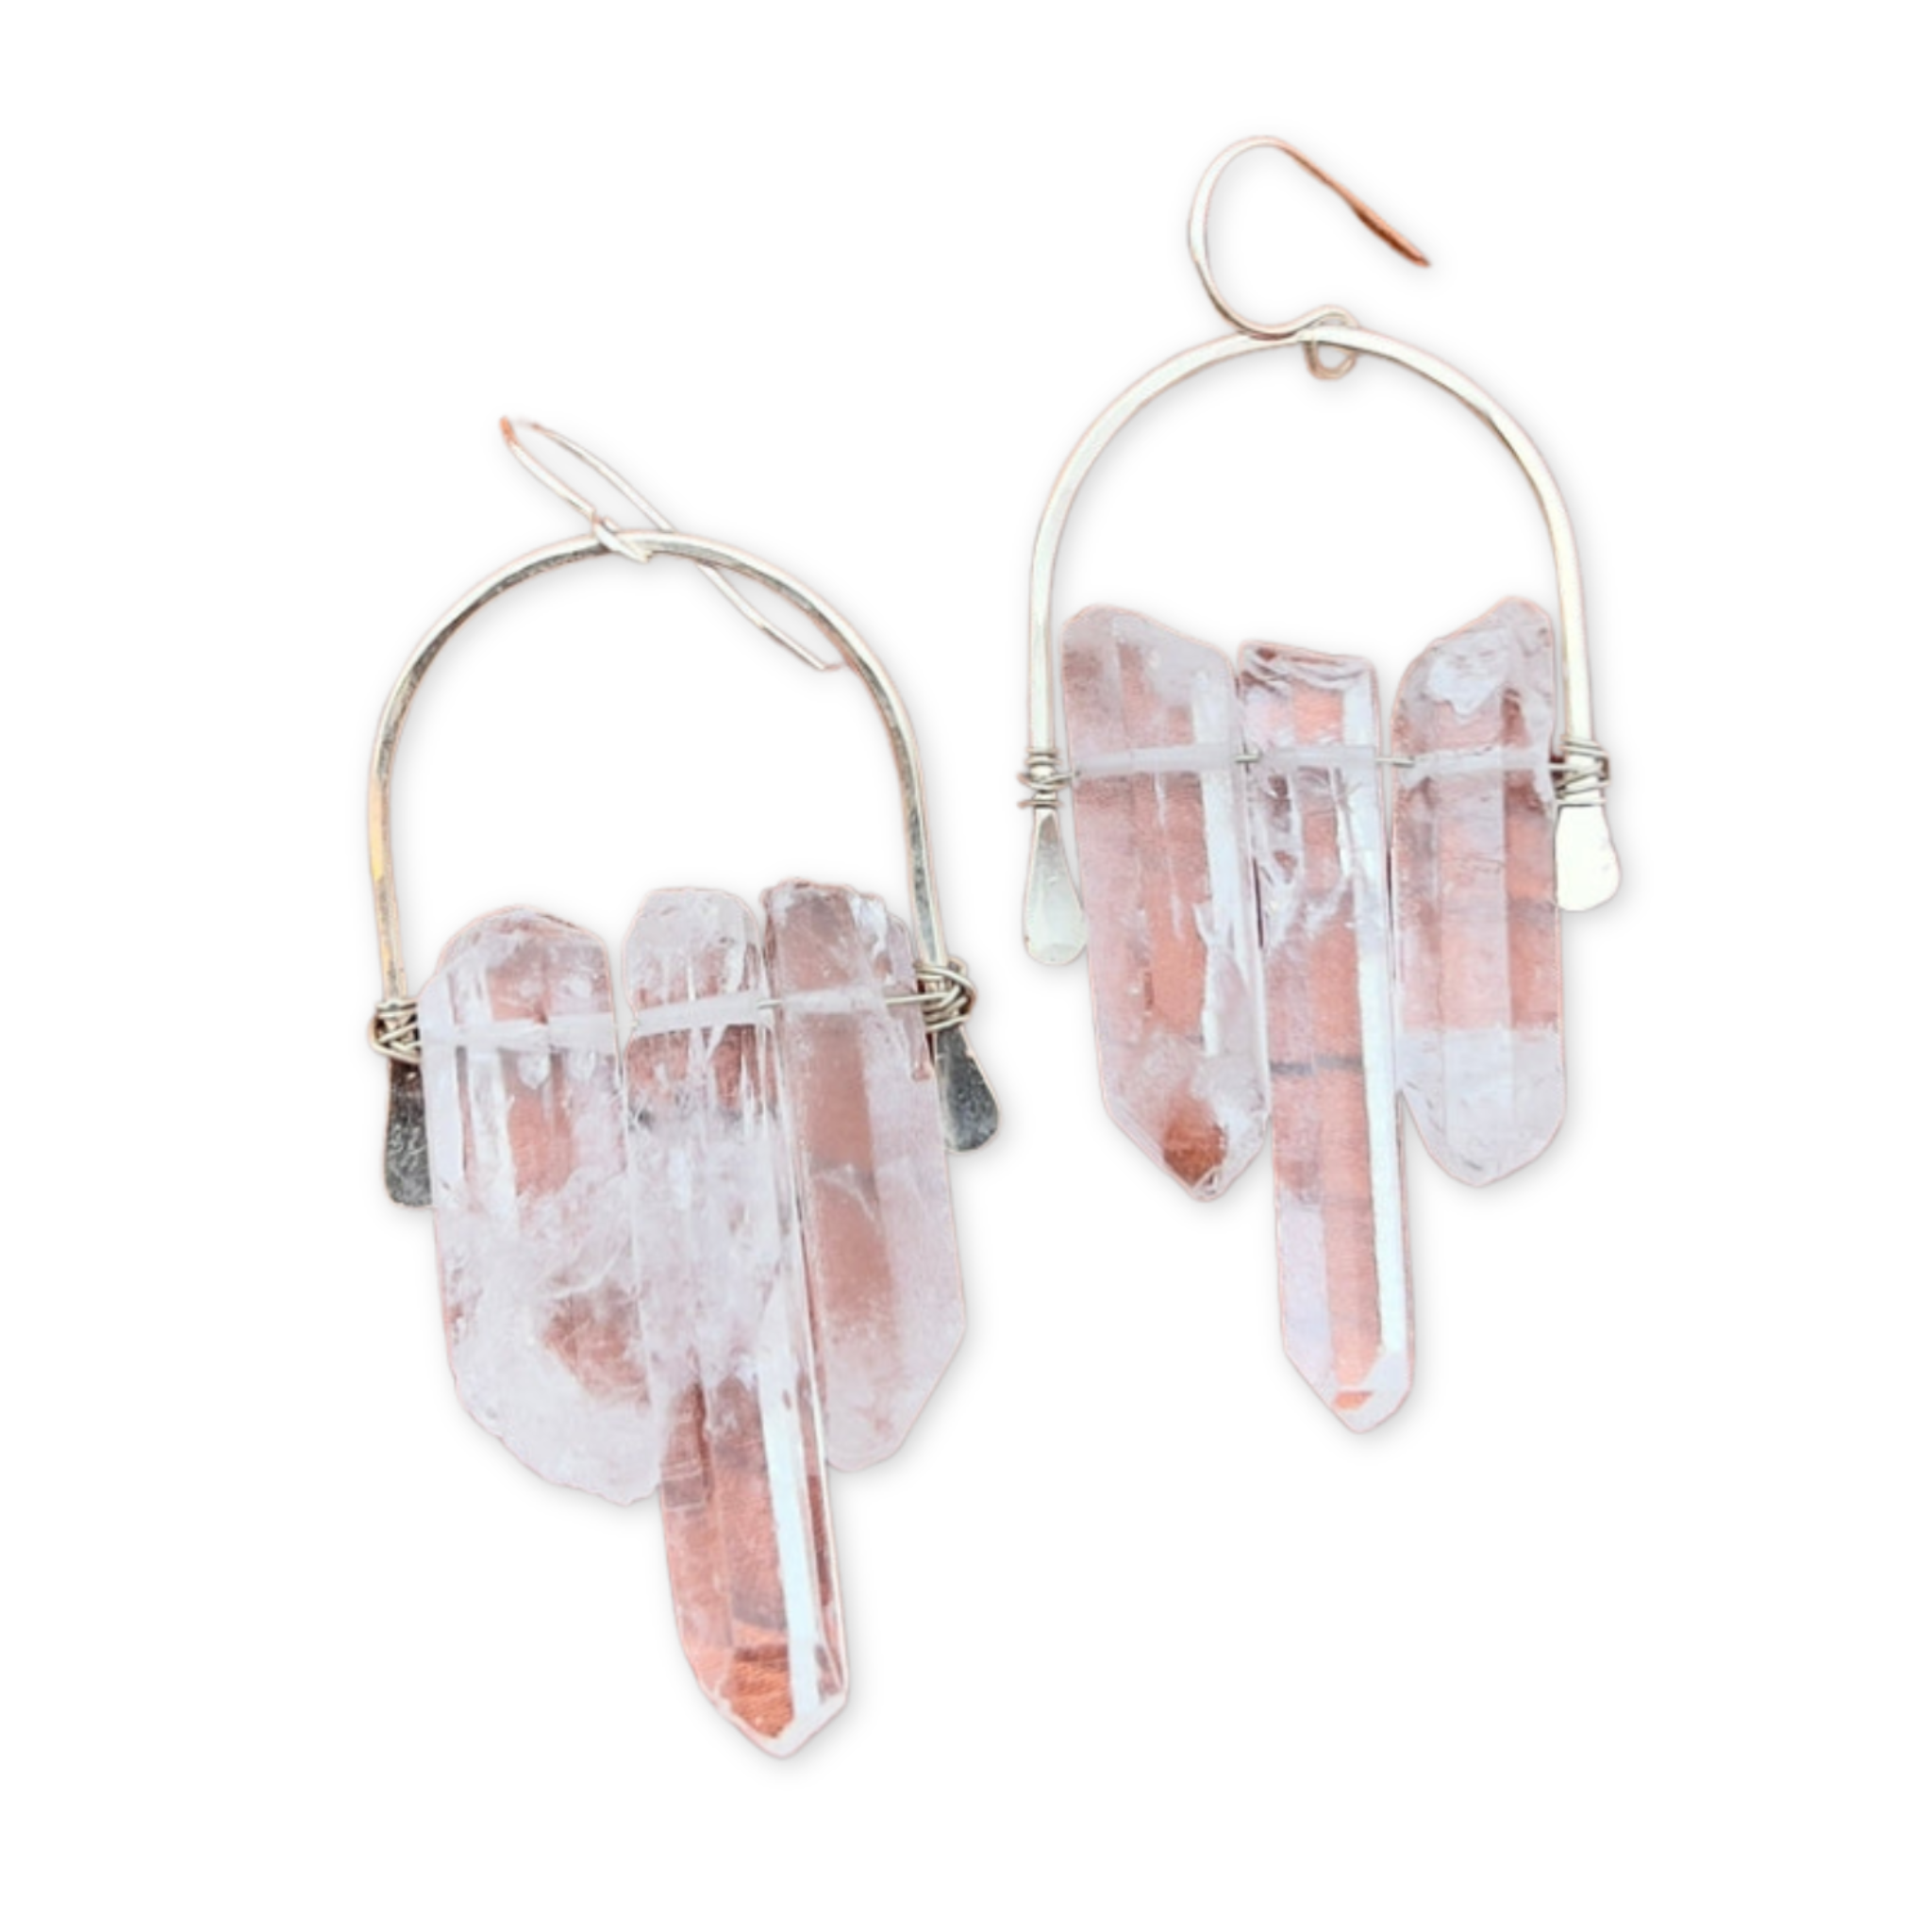 arch earrings with three long crystal quartz stones